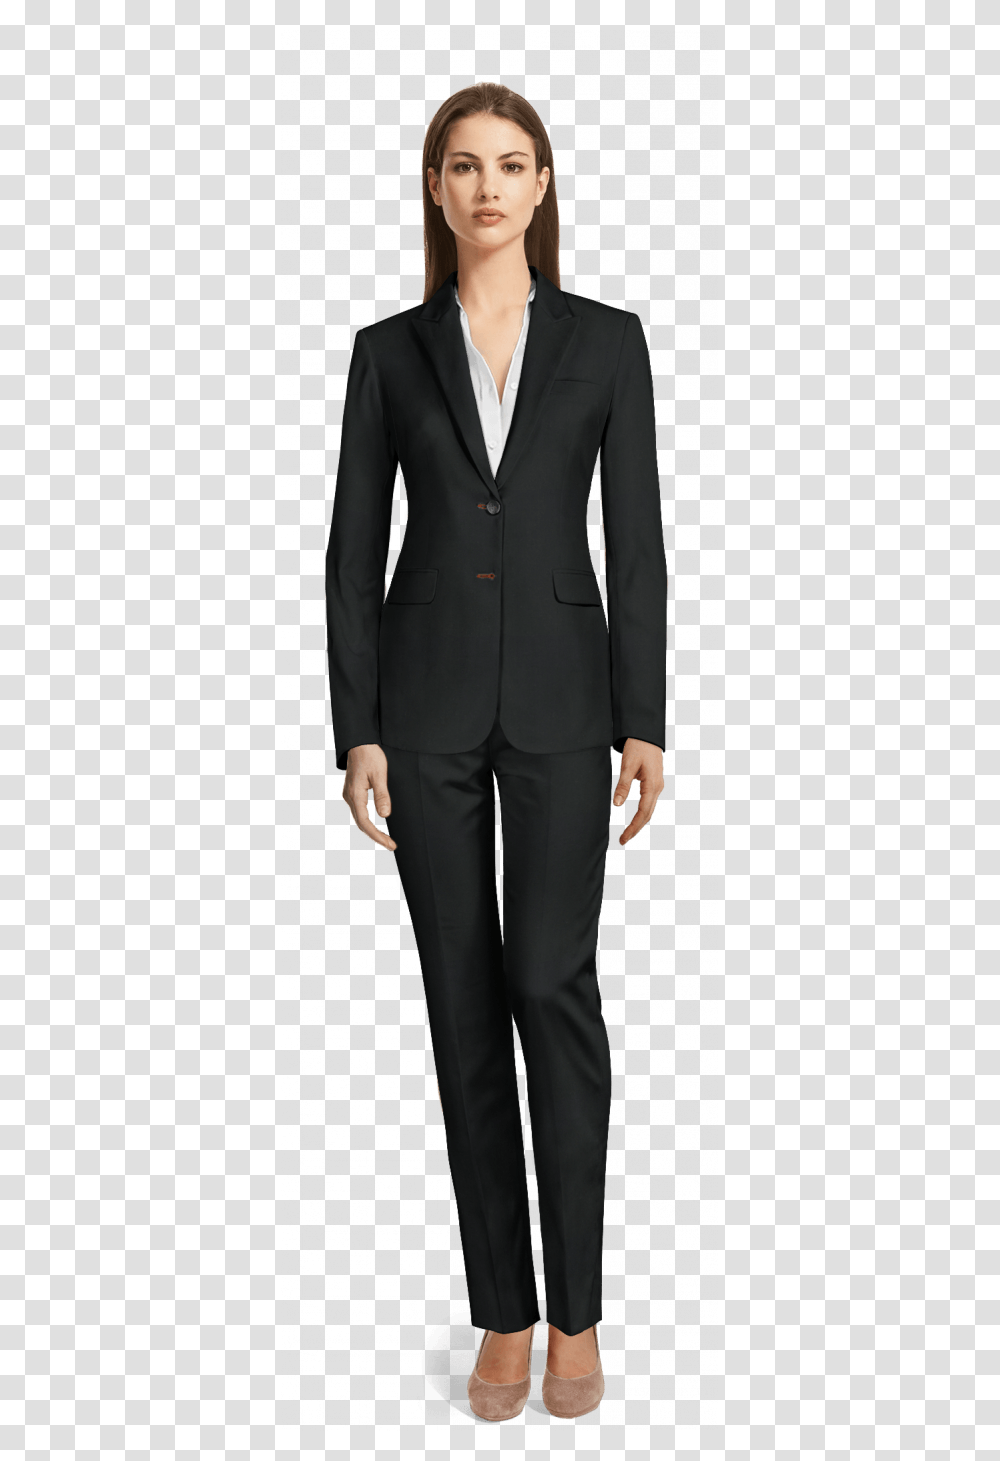 Black Man In Suit Whole Body Formal Attire For Women, Overcoat, Apparel, Tuxedo Transparent Png